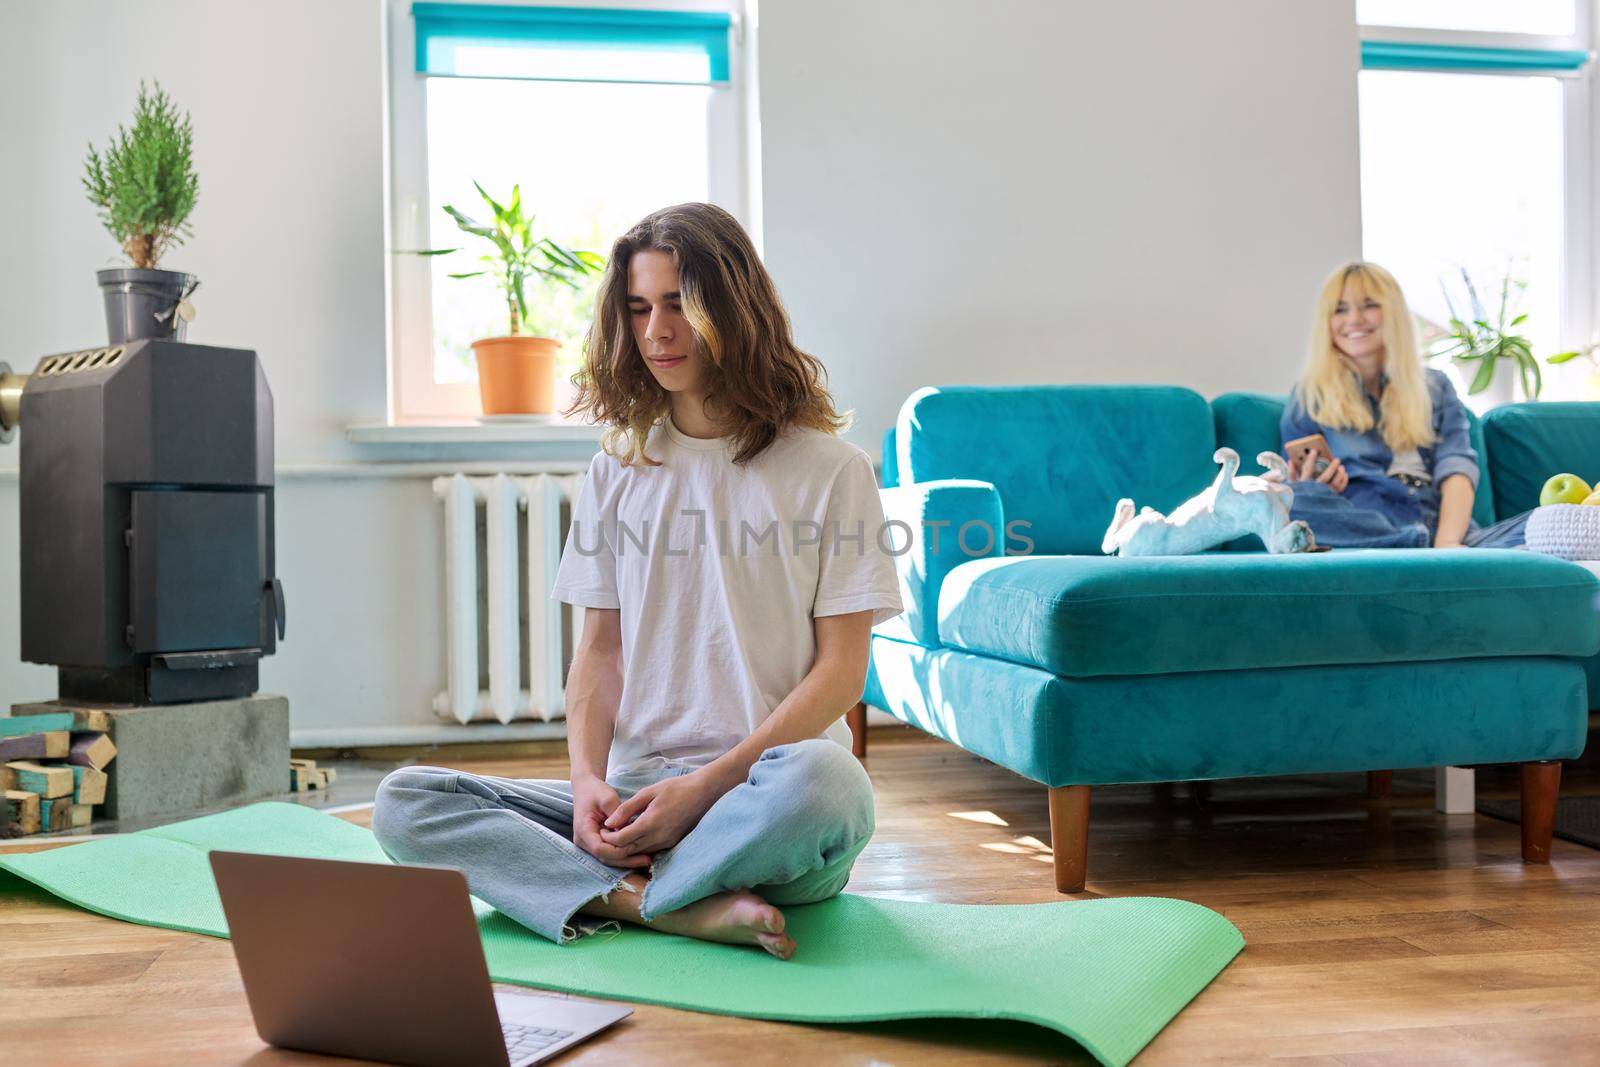 Guy teenager sitting in lotus position on yoga mat at home on floor with laptop. Meditation, online training, leisure, lifestyle, teenagers concept